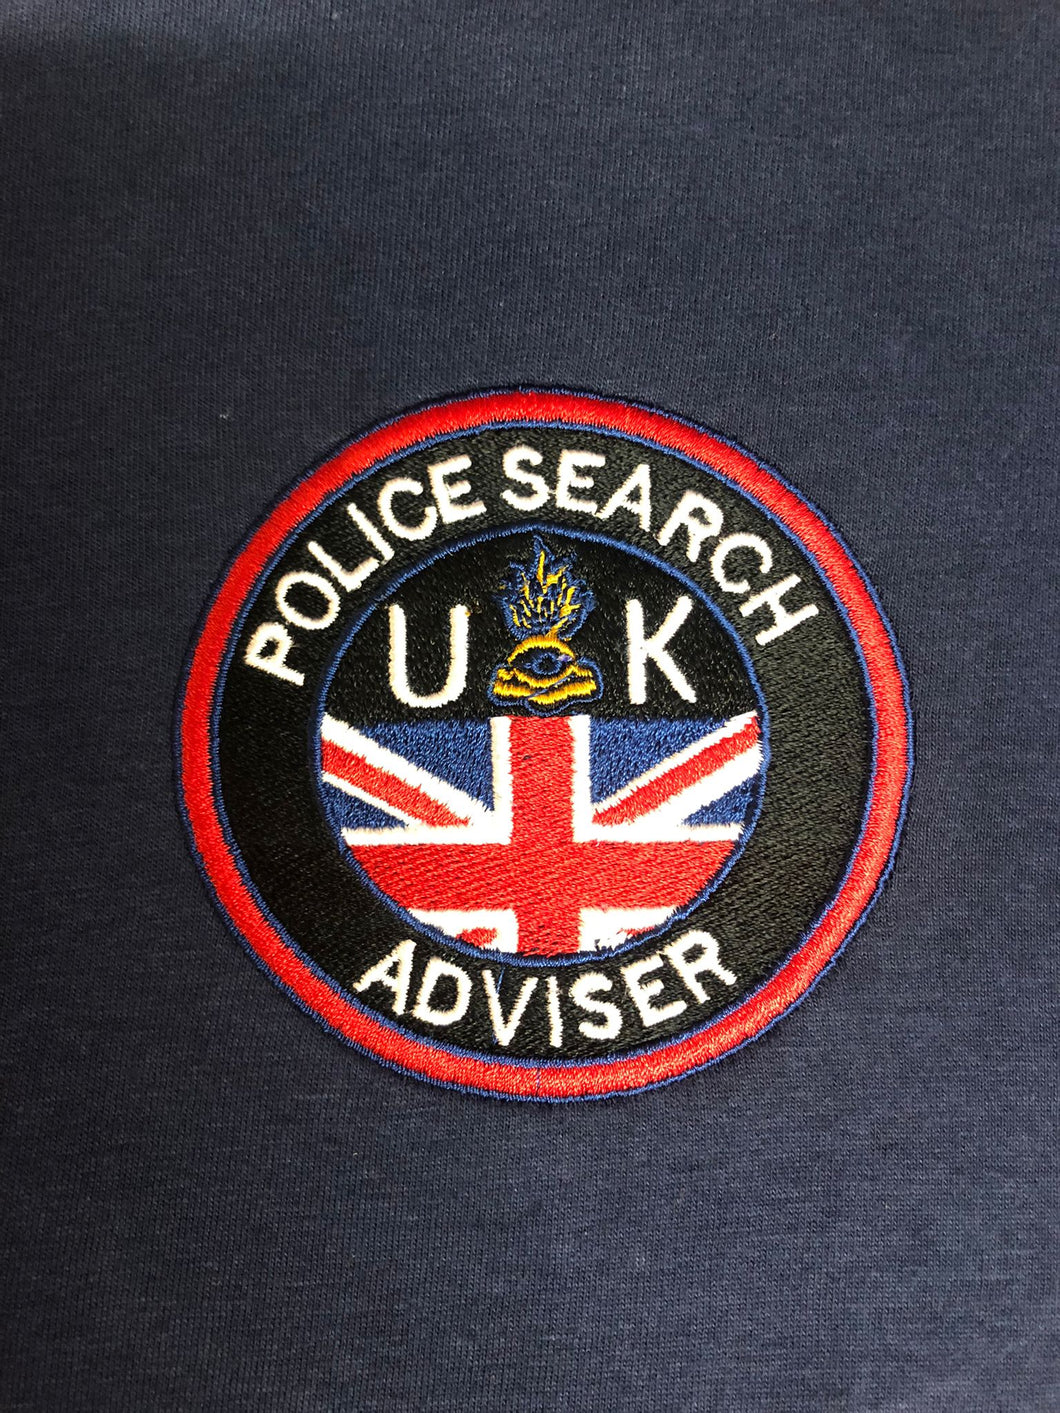 Police Search Advisor / EOD - Embroidered Design - Choose your Garment